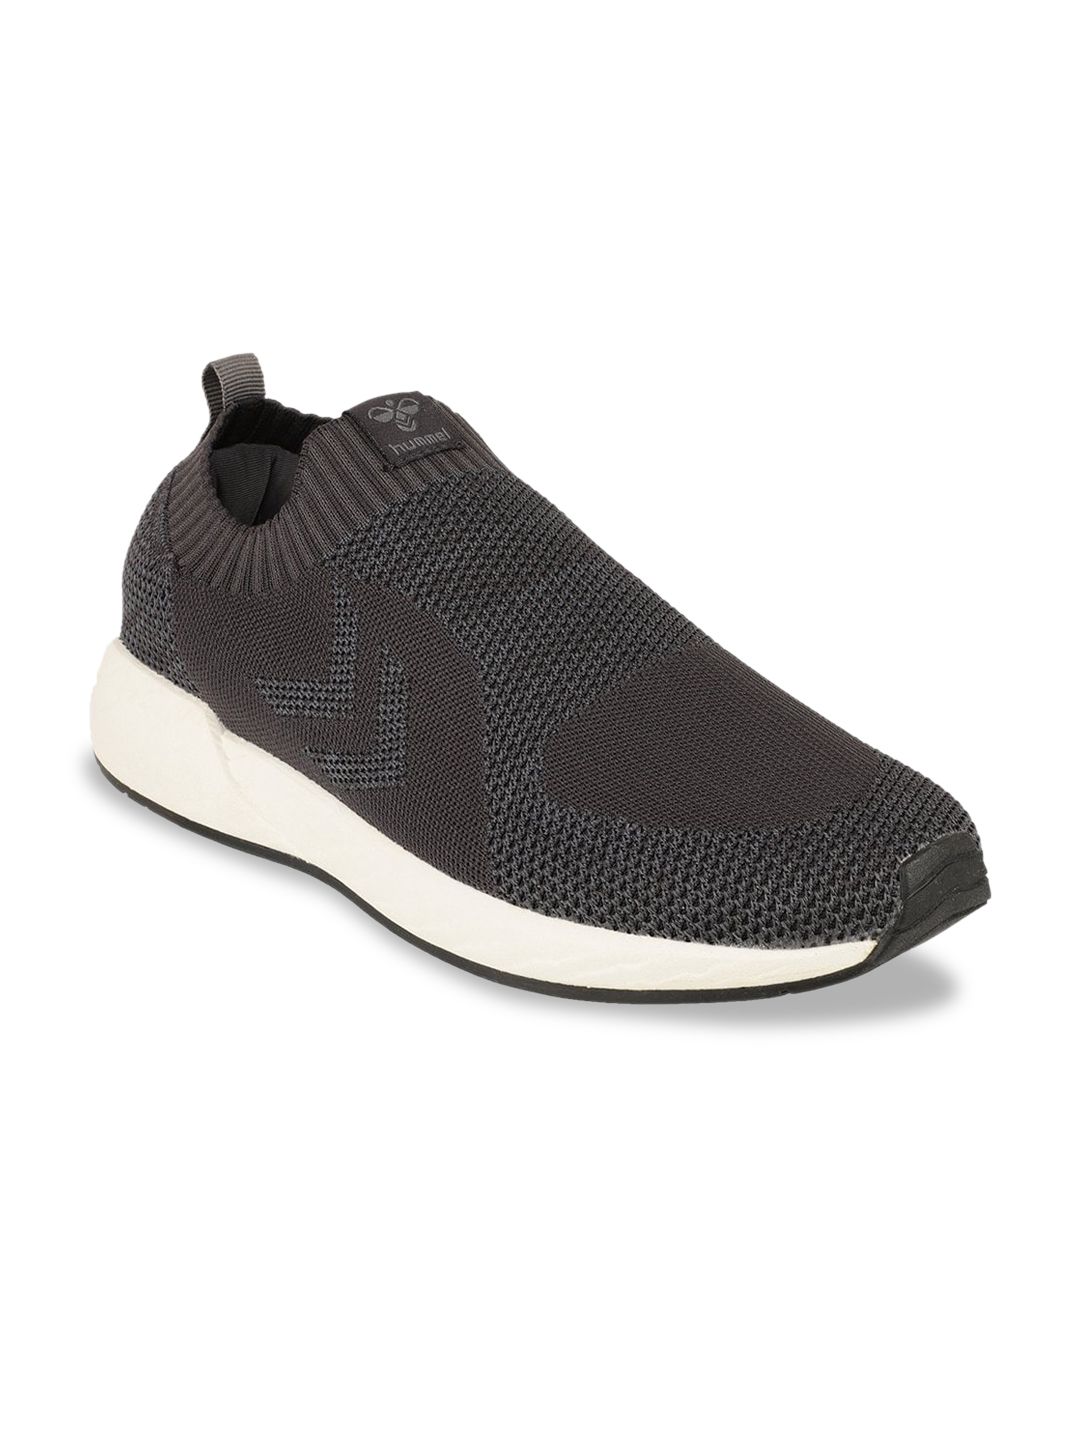 hummel Unisex Charcoal Grey Woven Design Zion Legend Slip-On Sneakers Price in India